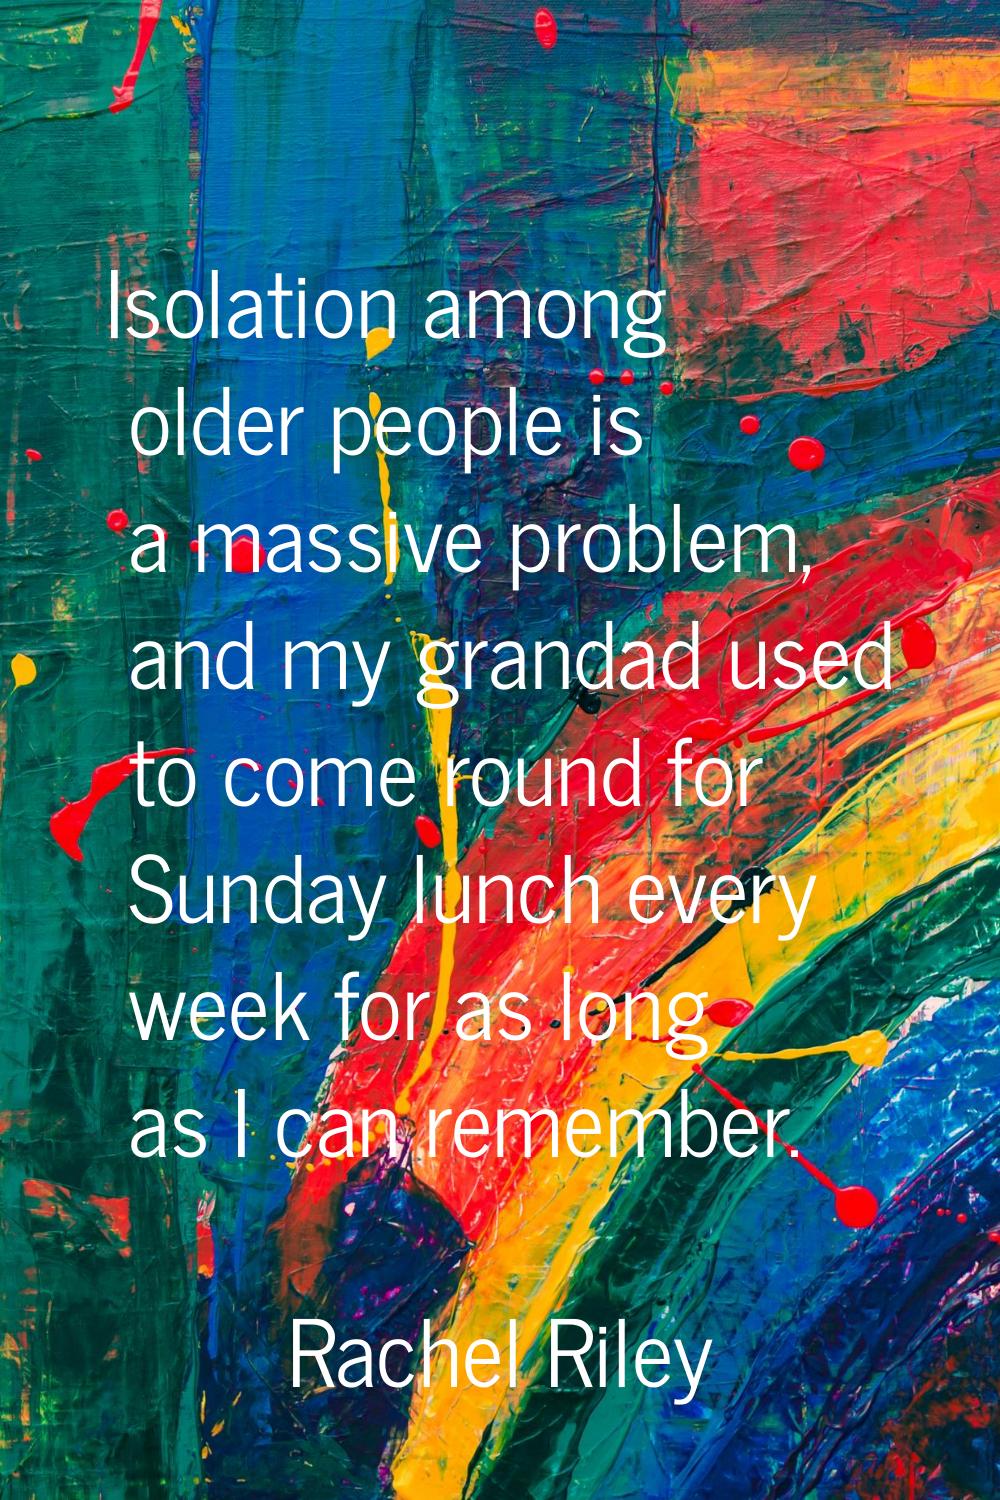 Isolation among older people is a massive problem, and my grandad used to come round for Sunday lun